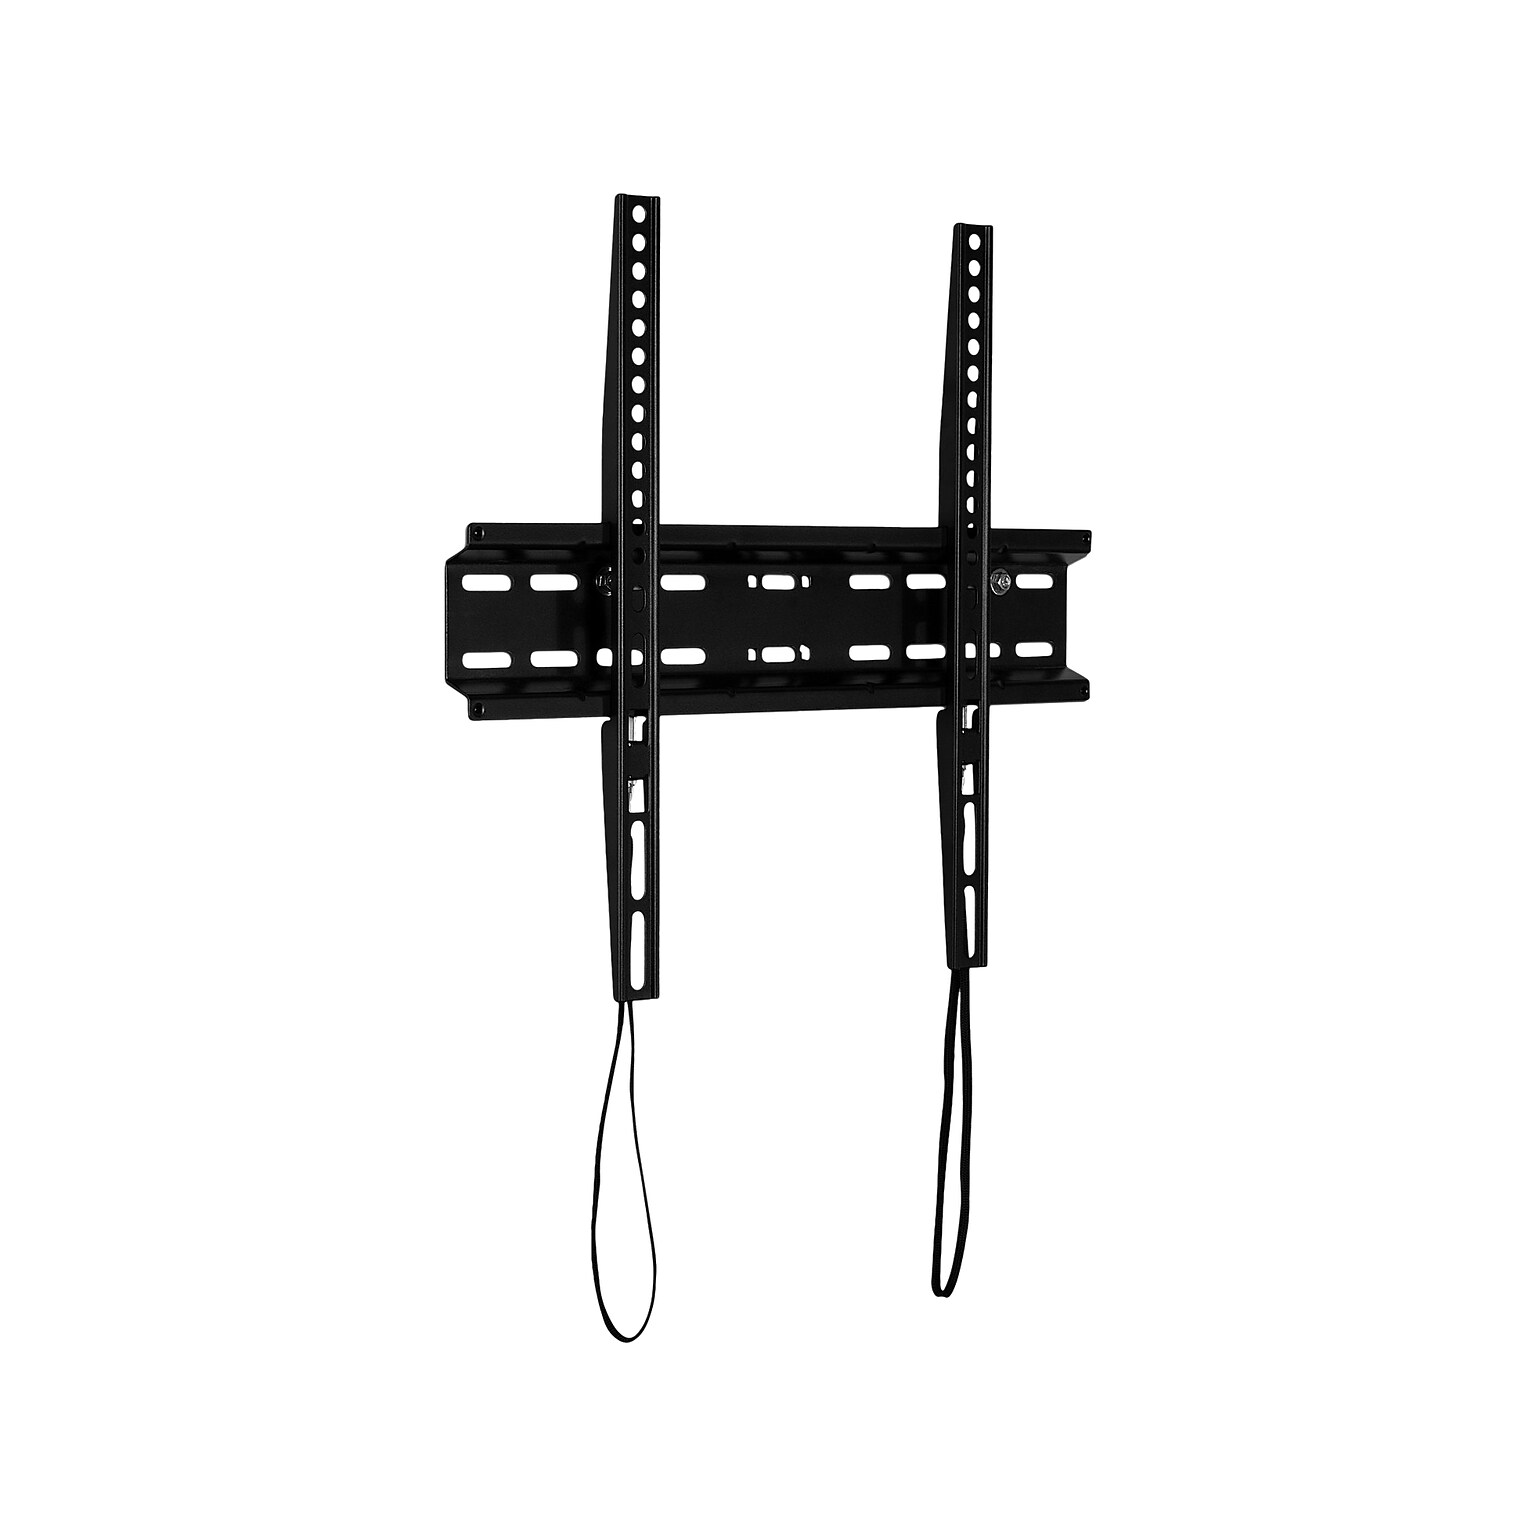 Mount-It! Fixed Wall TV Mount for LCD (Low Profile Slim), Lockable, Screen Size: 32-55, 77 lbs. Max. (MI-3050)